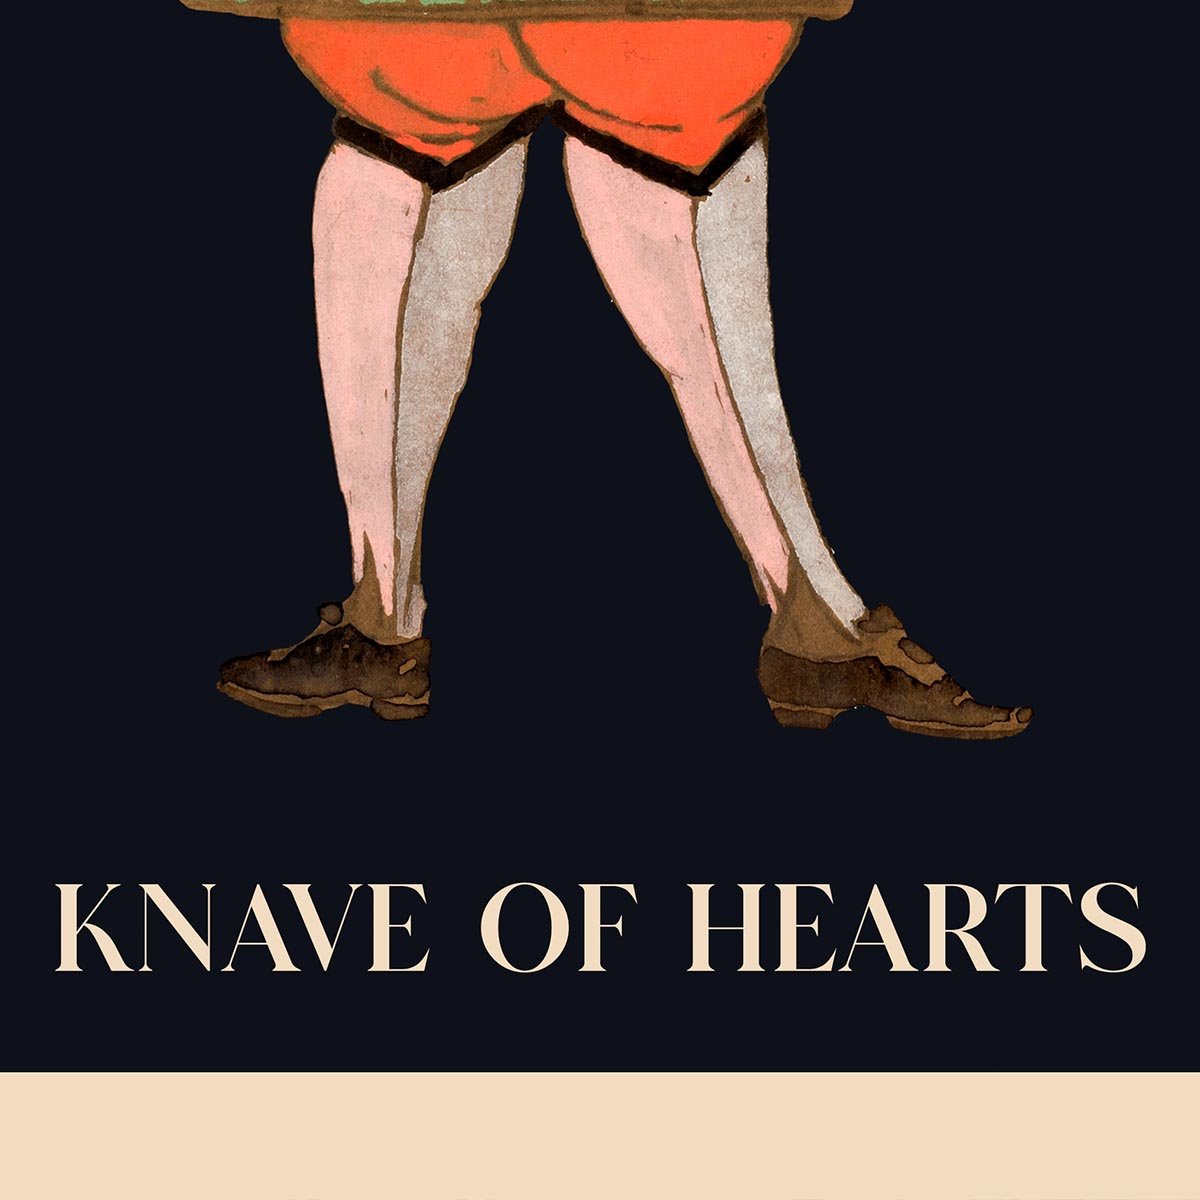 Knave of Hearts from Alice in Wonderland